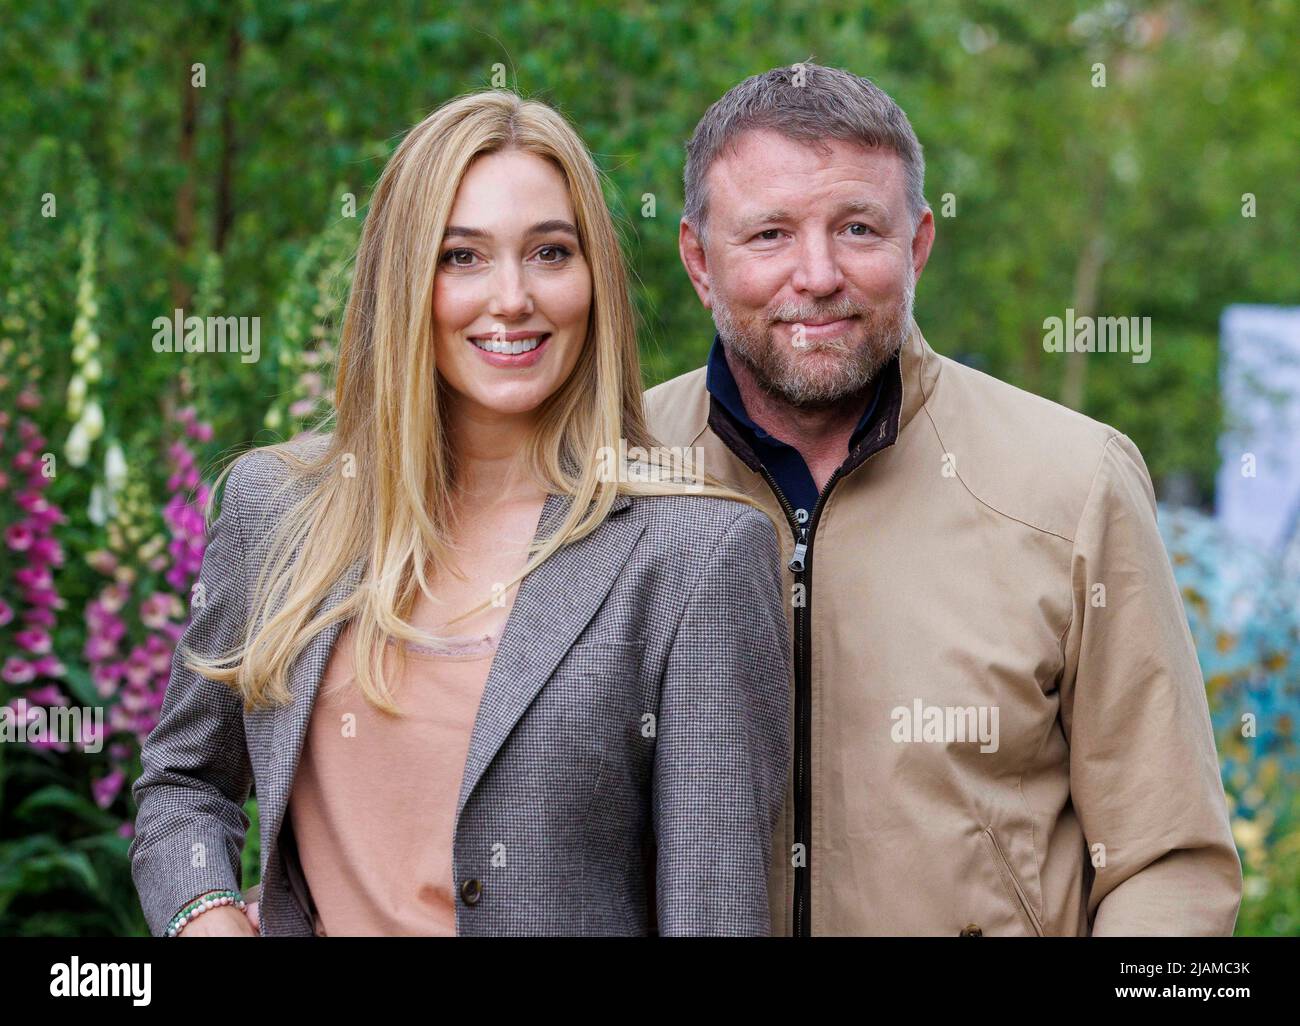 Film Director, Producer, screenwriter and businessman, Guy Ritchie with his wife, Jacqui Ainsley, a model. Stock Photo